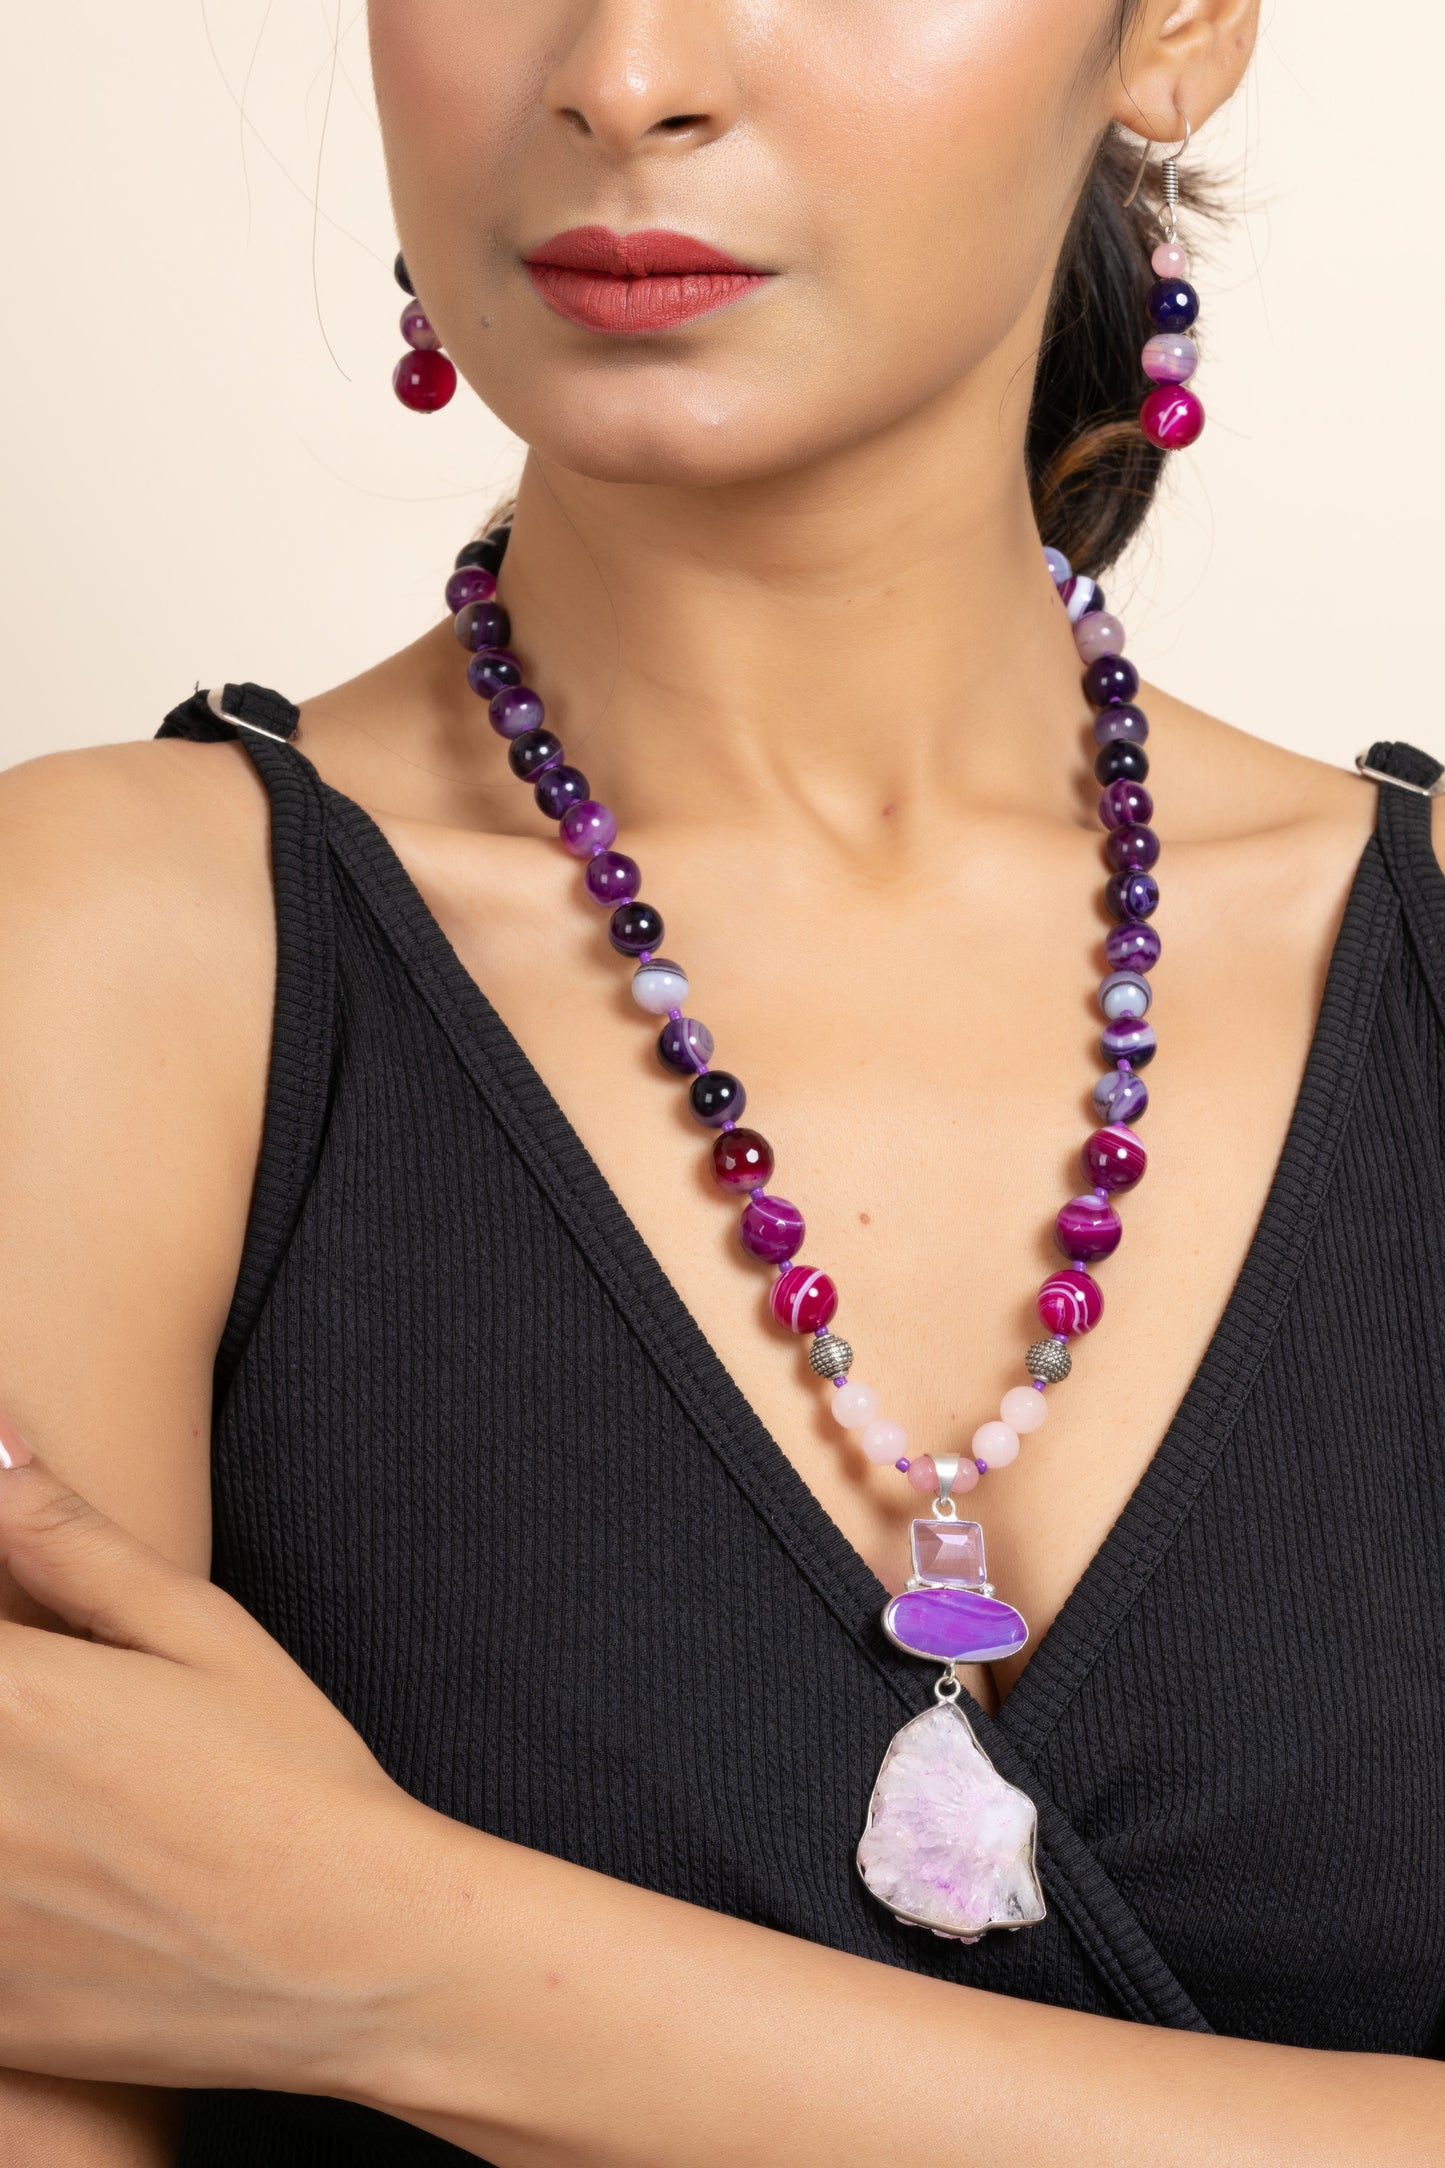 Handmade Semi Precious Purple Pink Agate Onyx Stone Necklace with Matching Earring Set